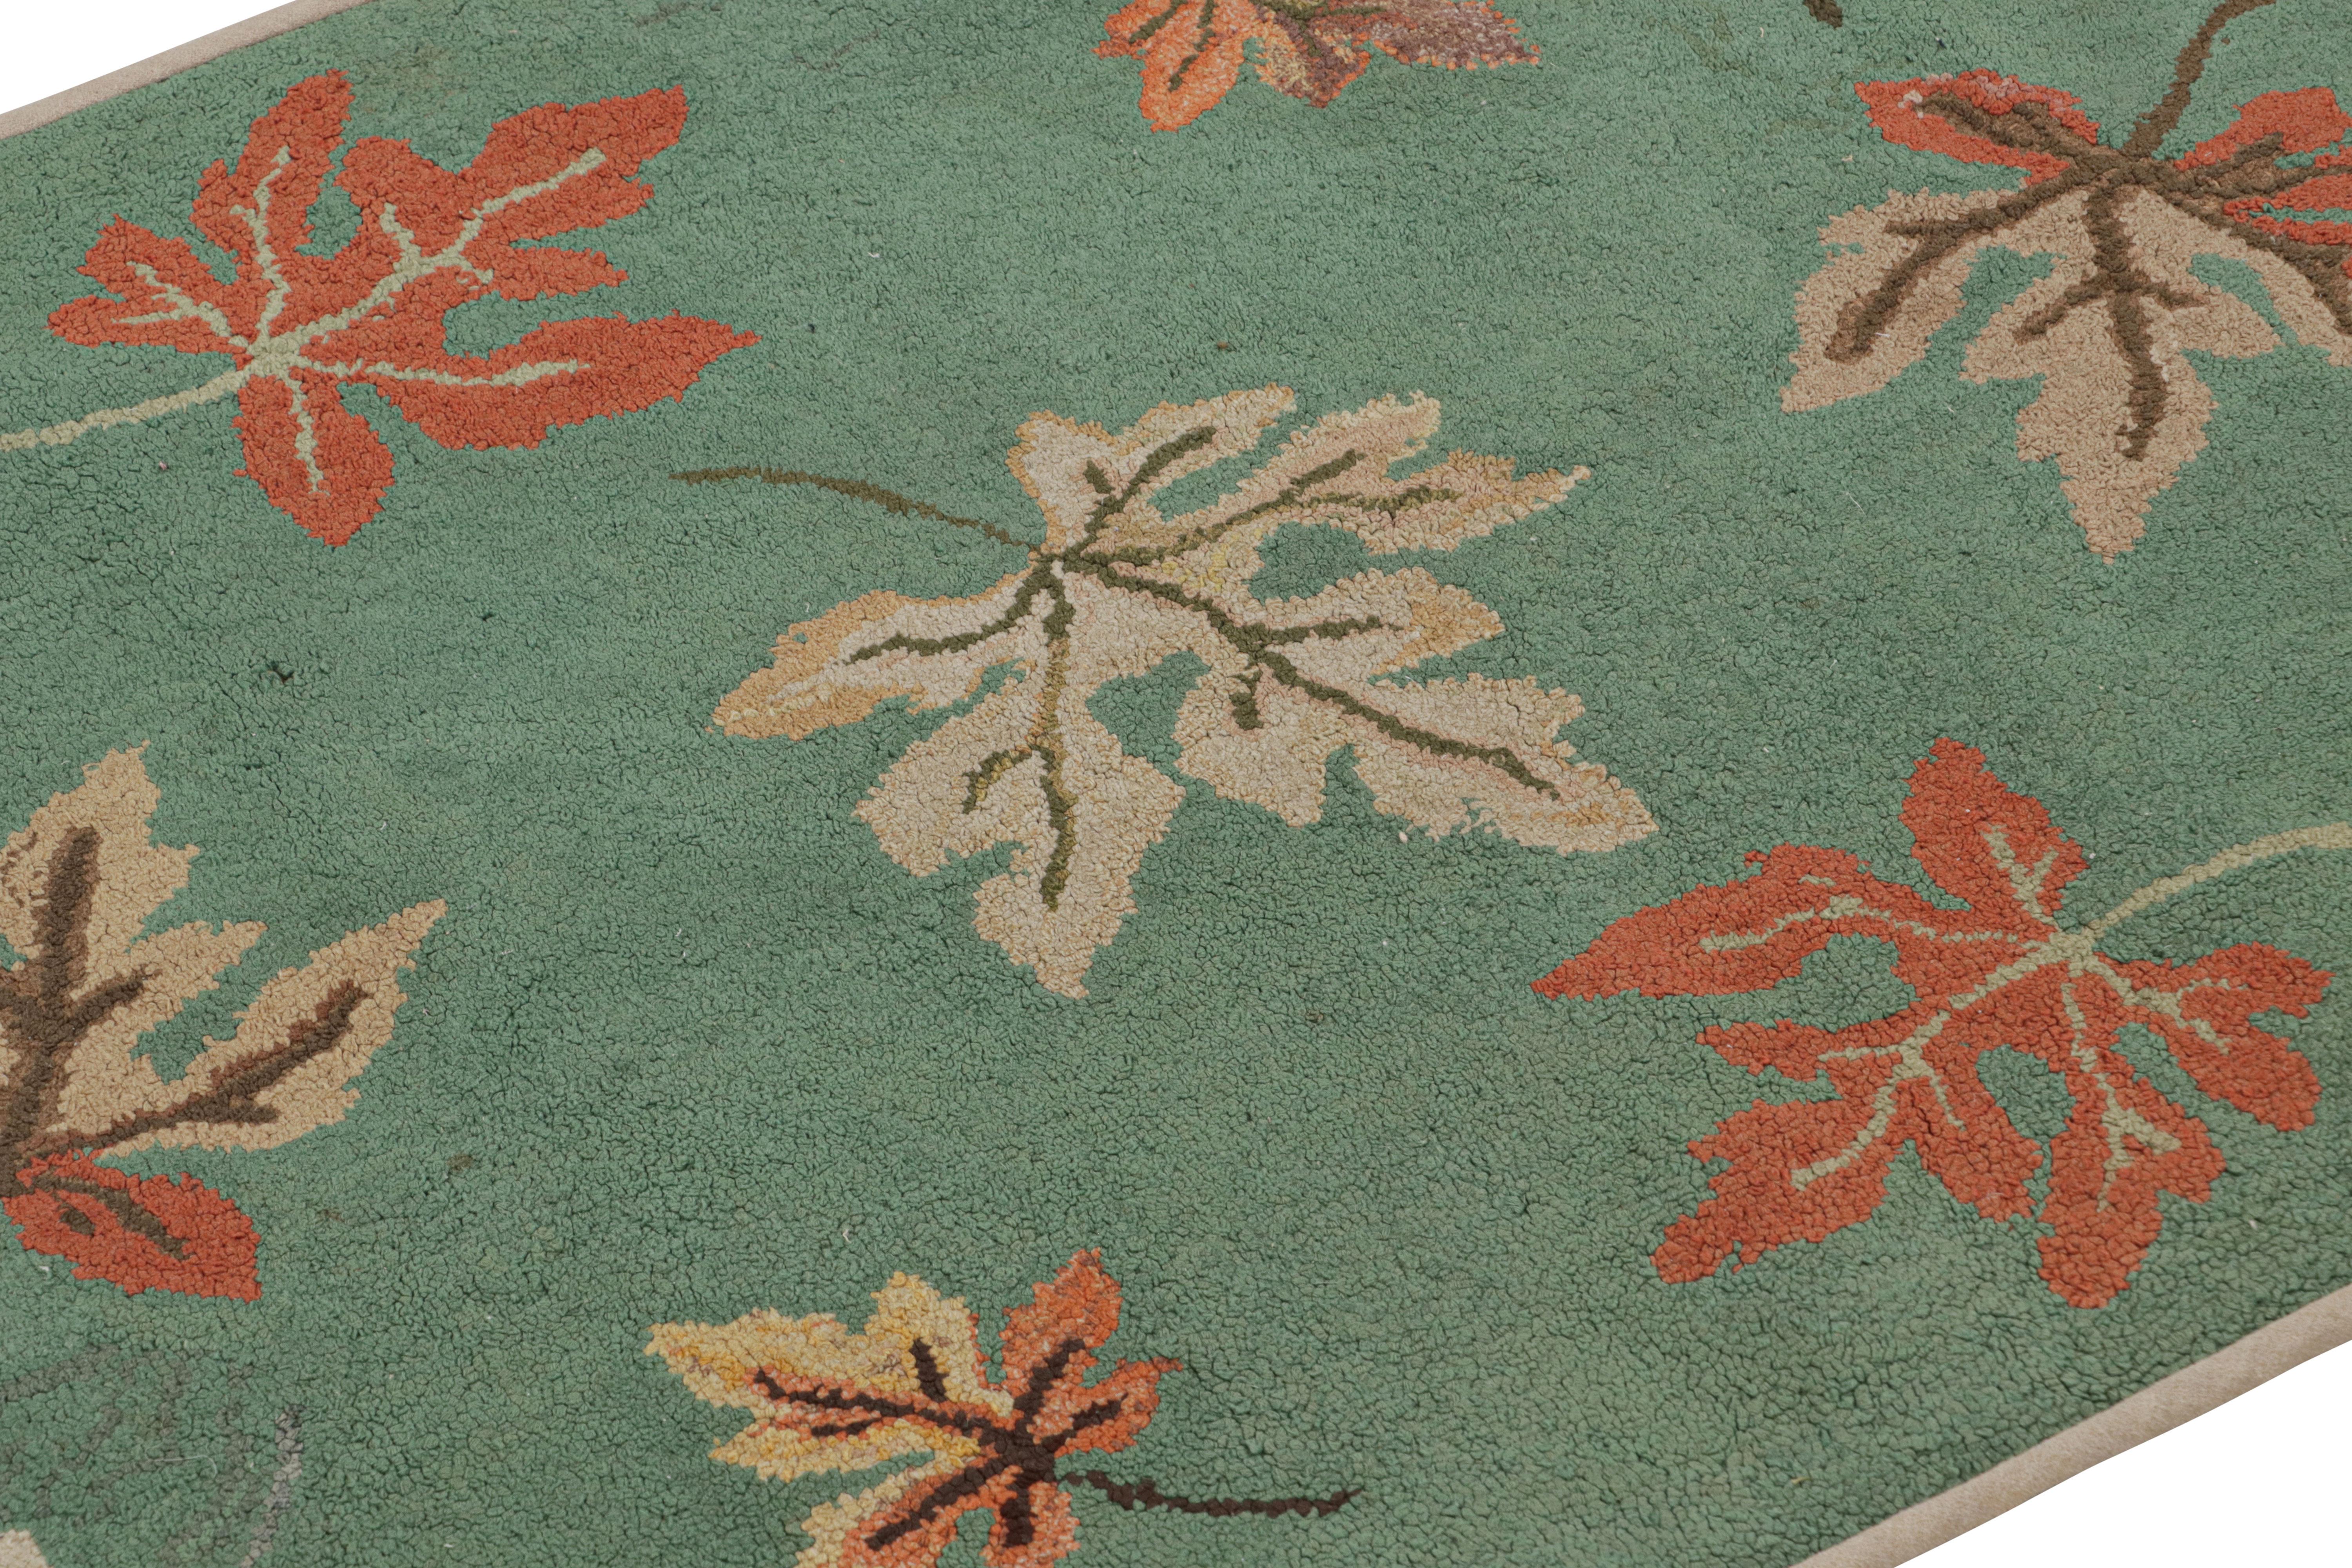 Early 20th Century Antique Hooked Rug in Seafoam with Leaf Floral Patterns, from Rug & Kilim For Sale